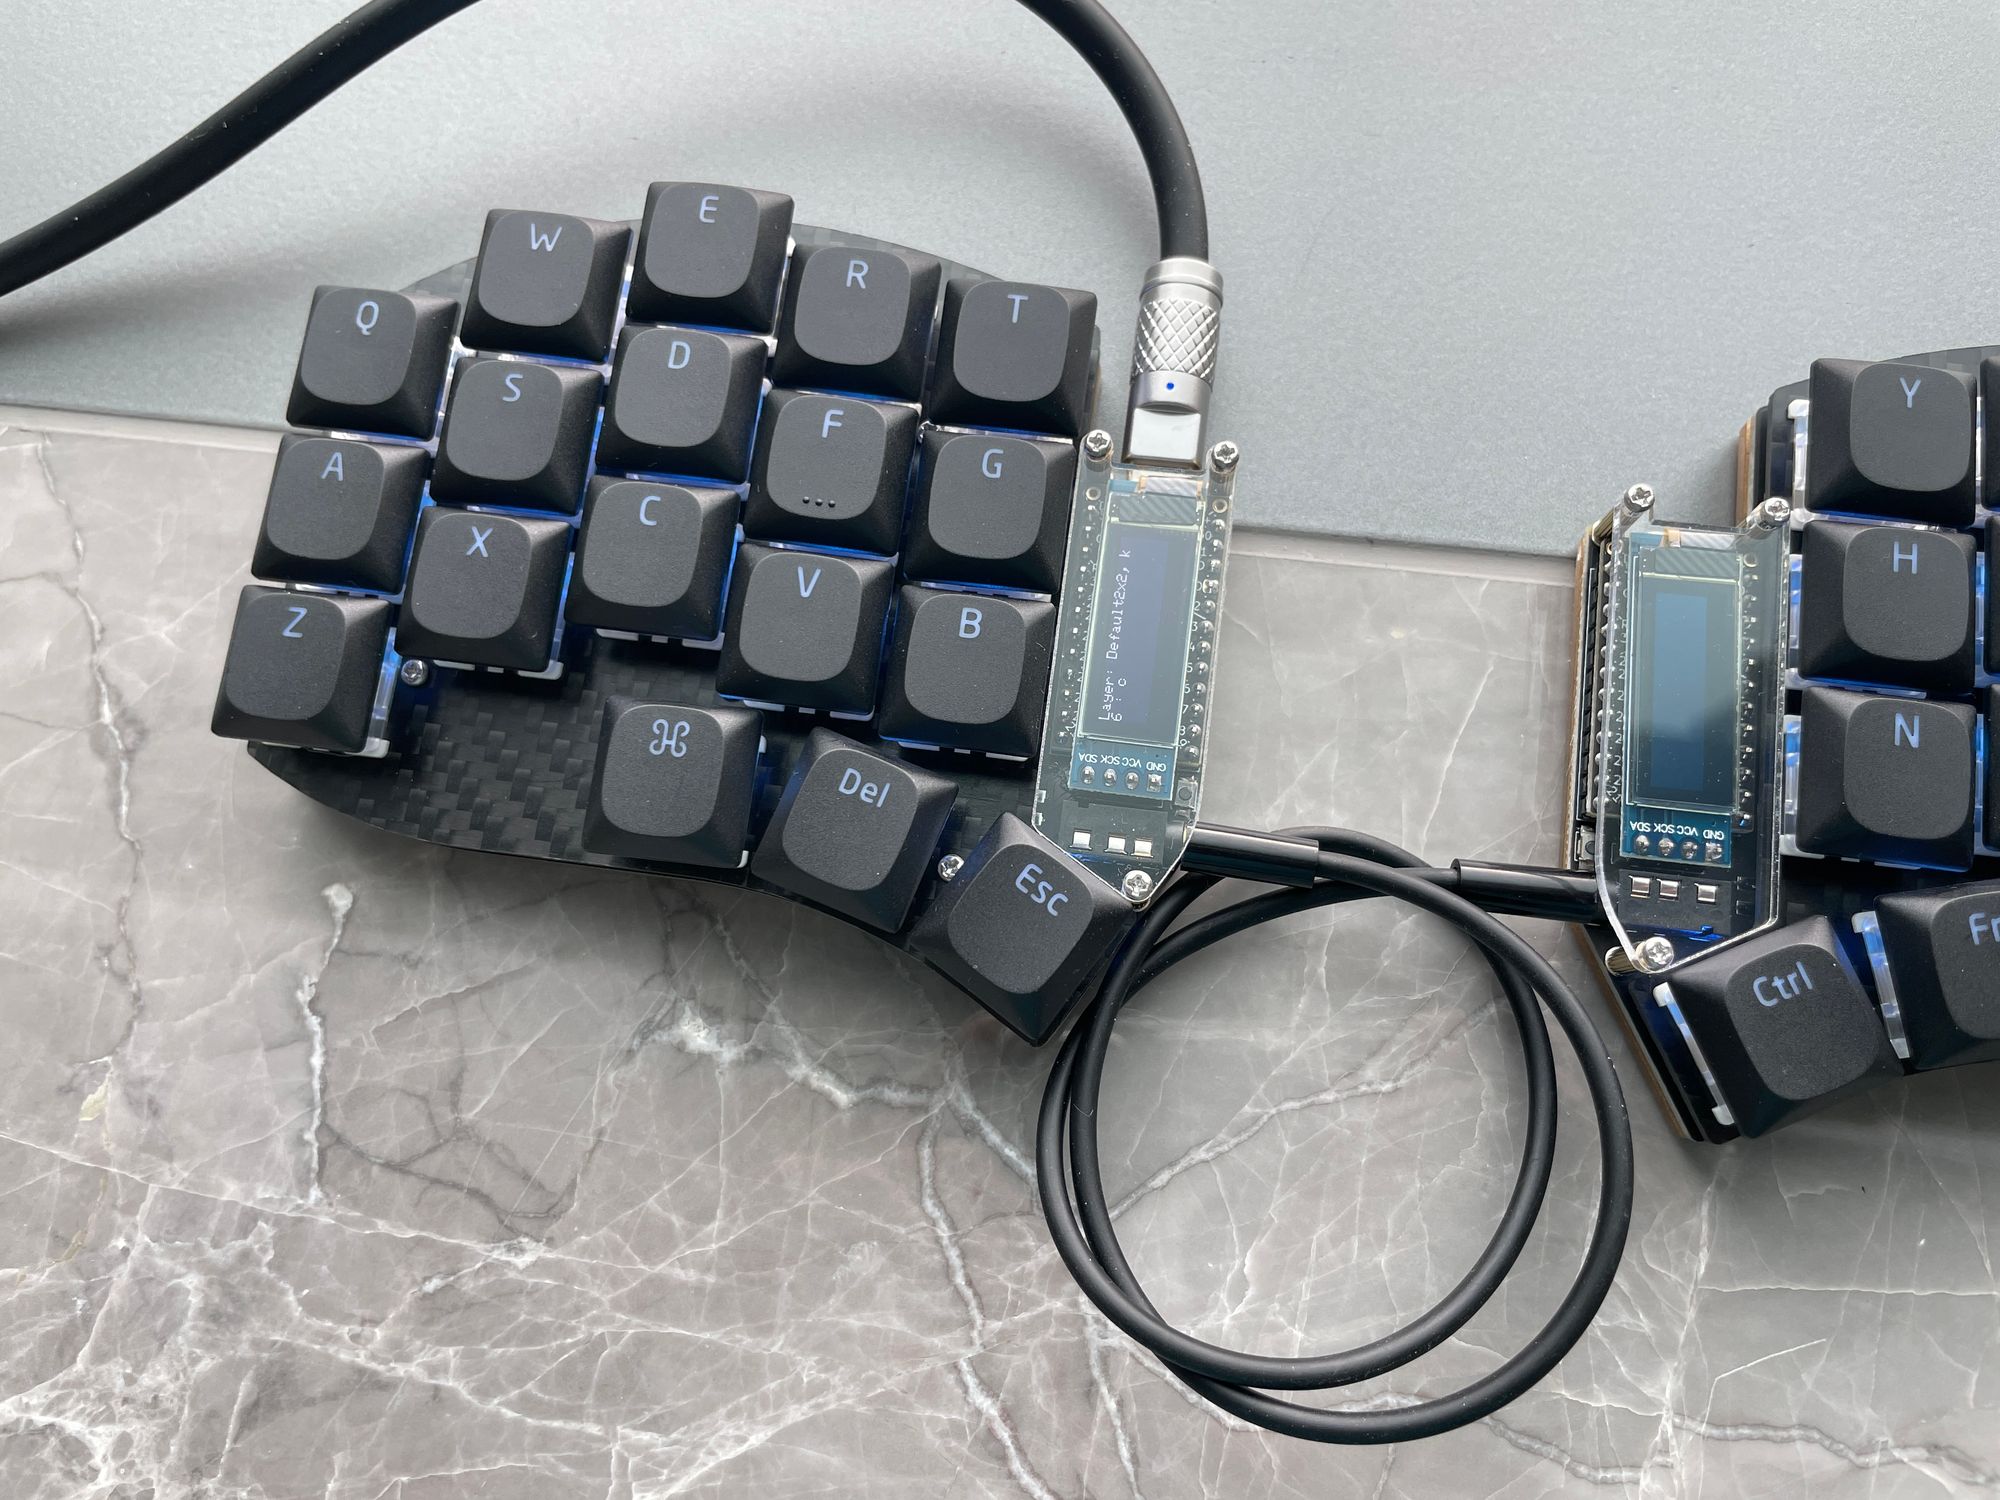 Swoop Keyboard with RGB LEDs and OLED display